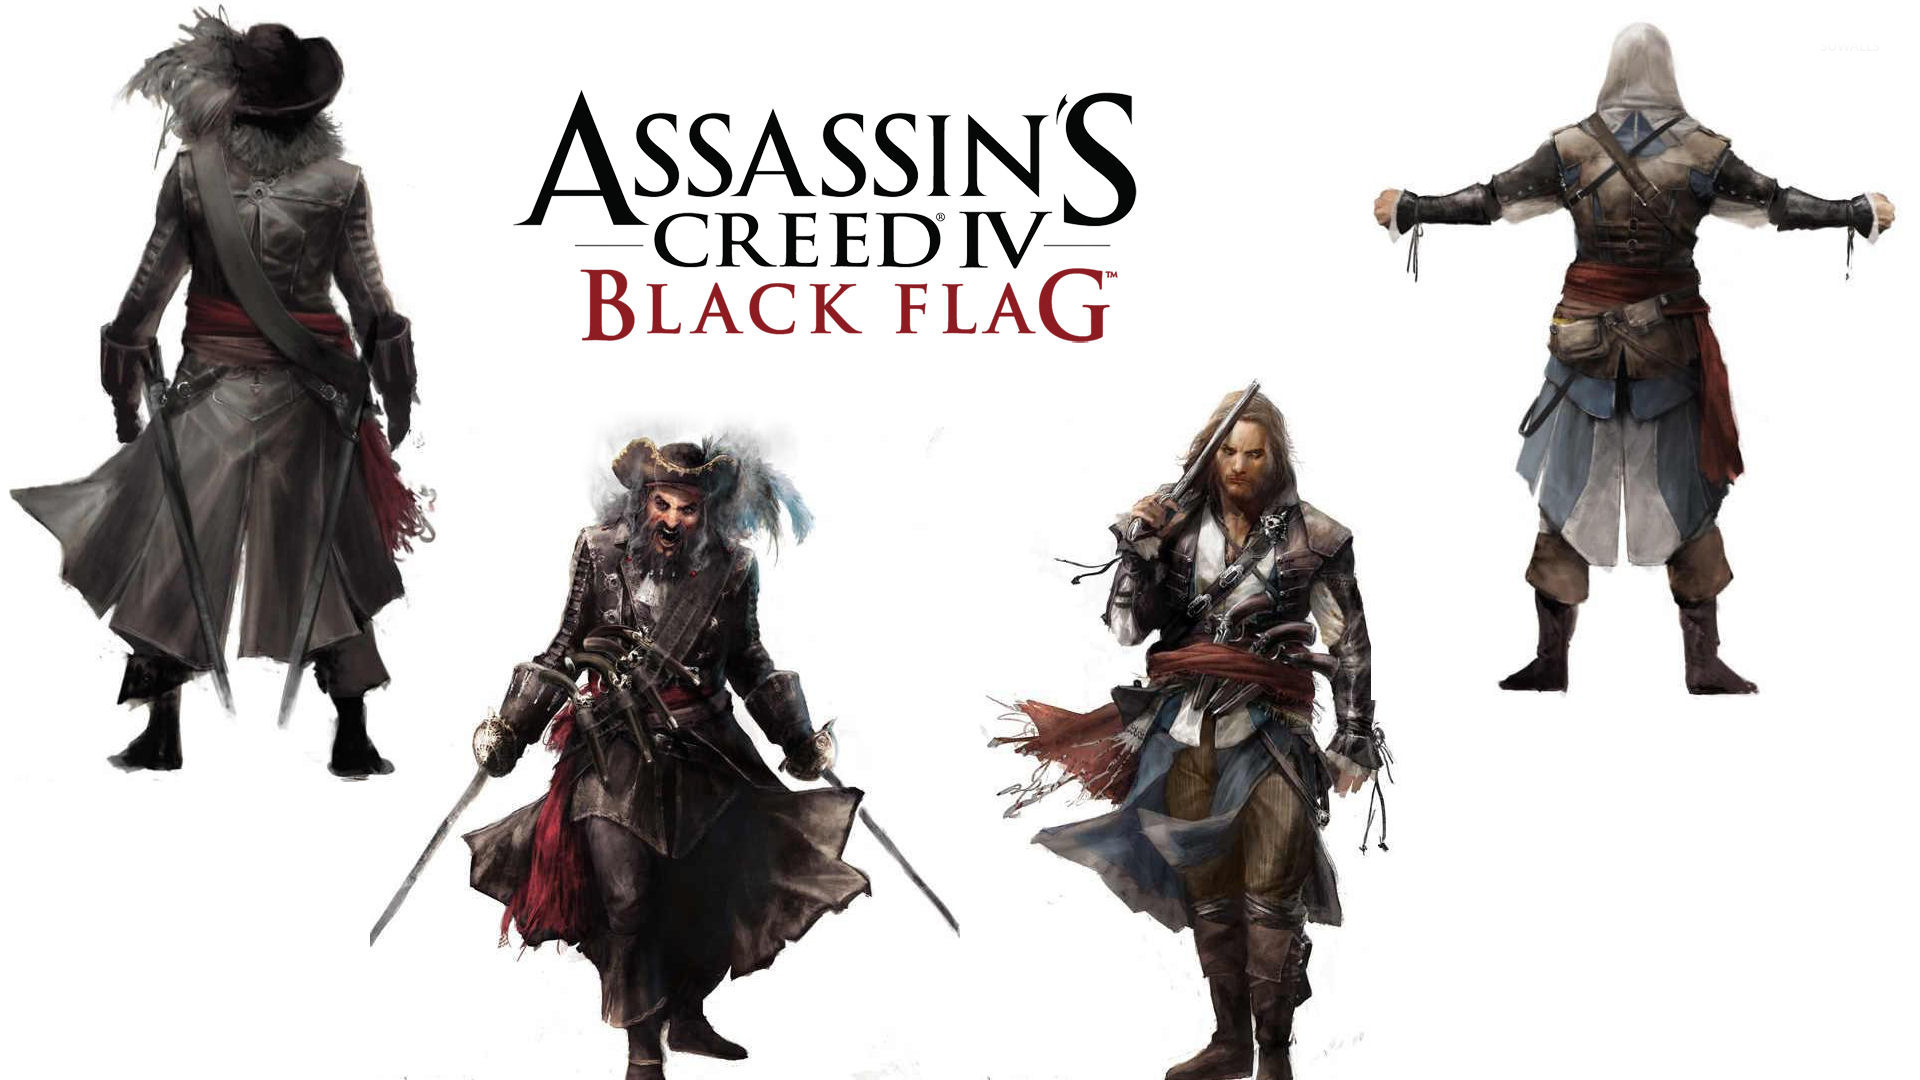 Assassin's Creed IV: Black Flag [16] wallpaper - Game wallpapers - #22025